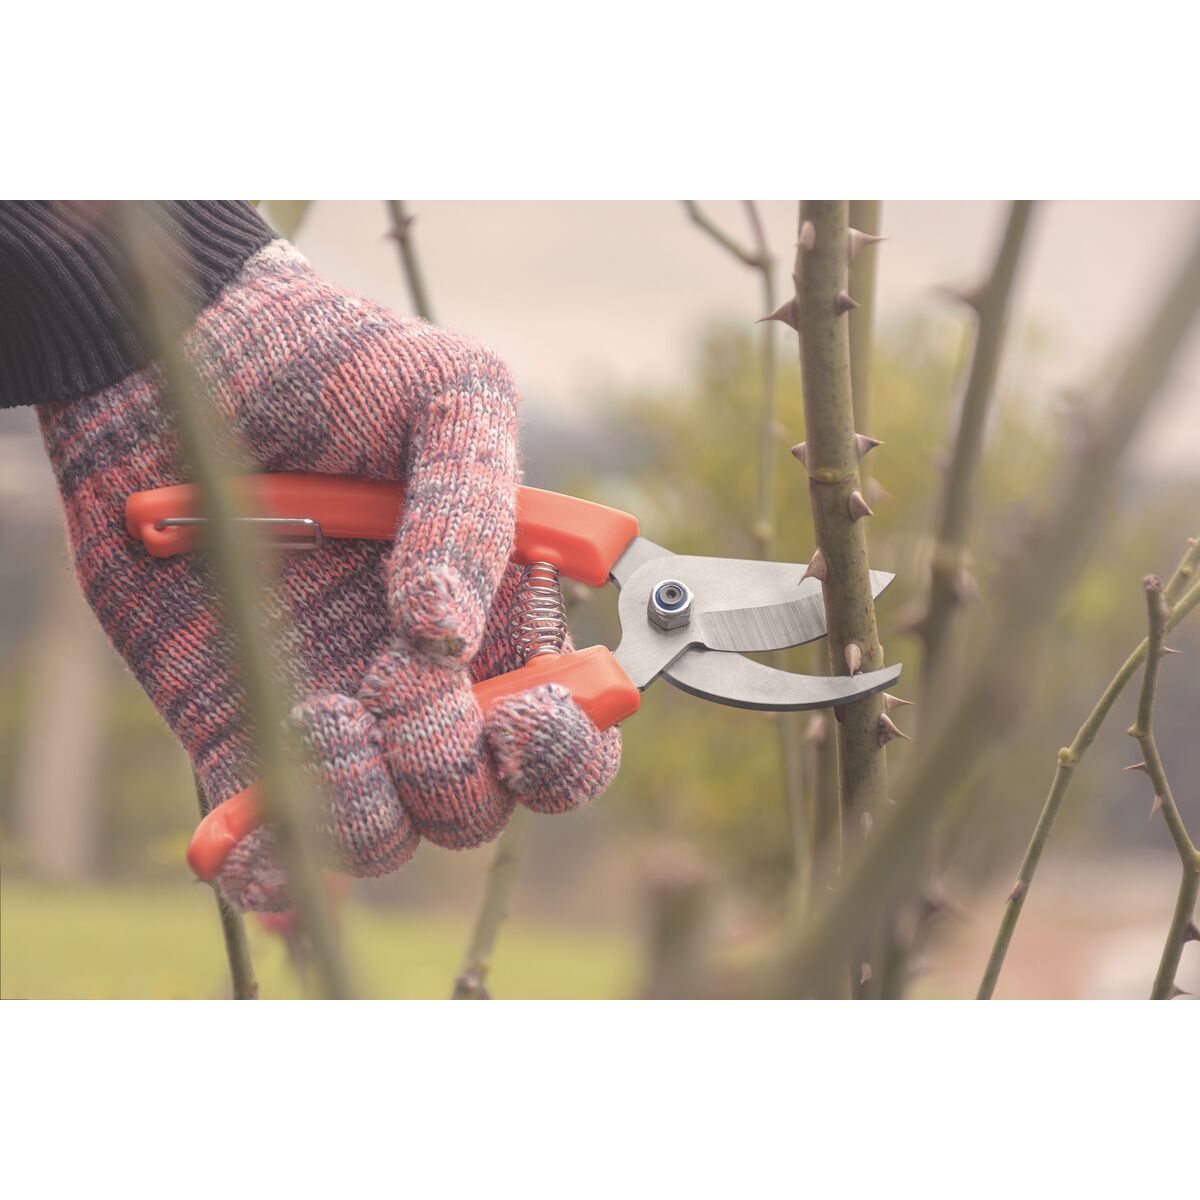 Tramontina's pruners with metal blades and plastic handles | Tramontina